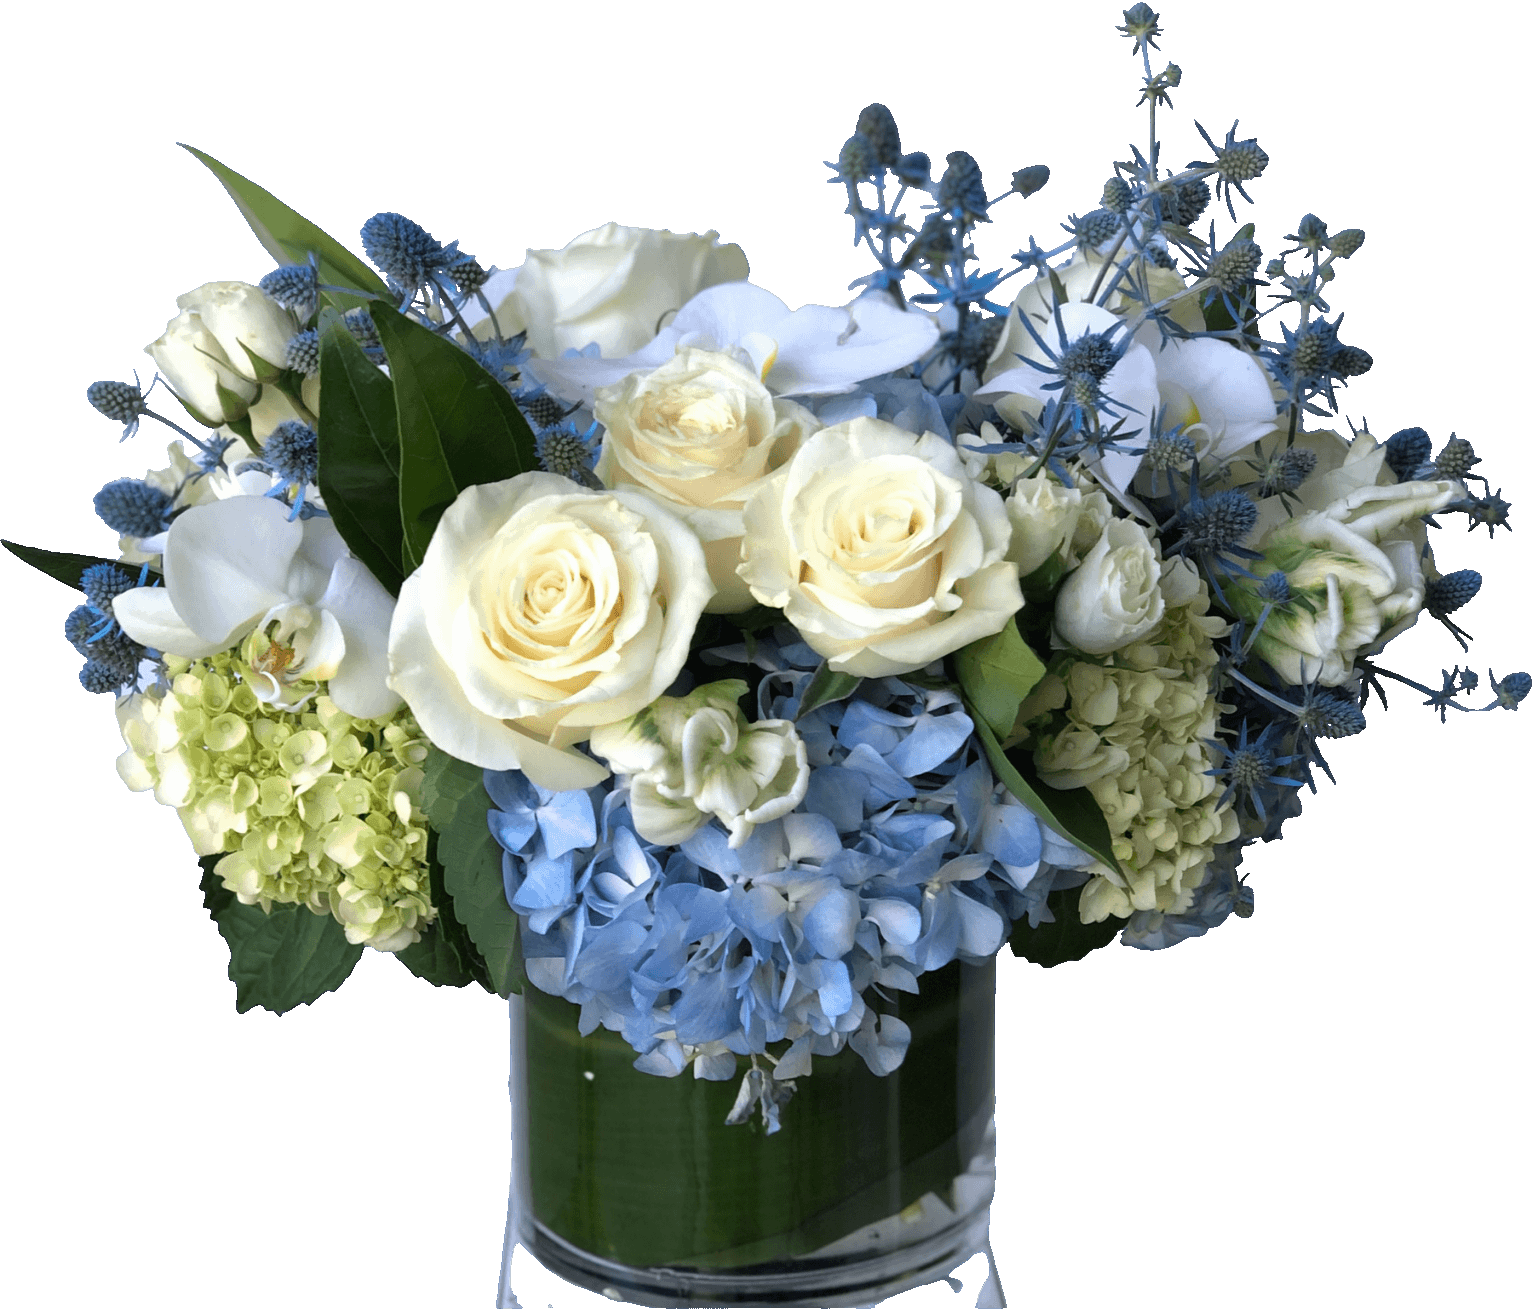 mixture of blue and white florals